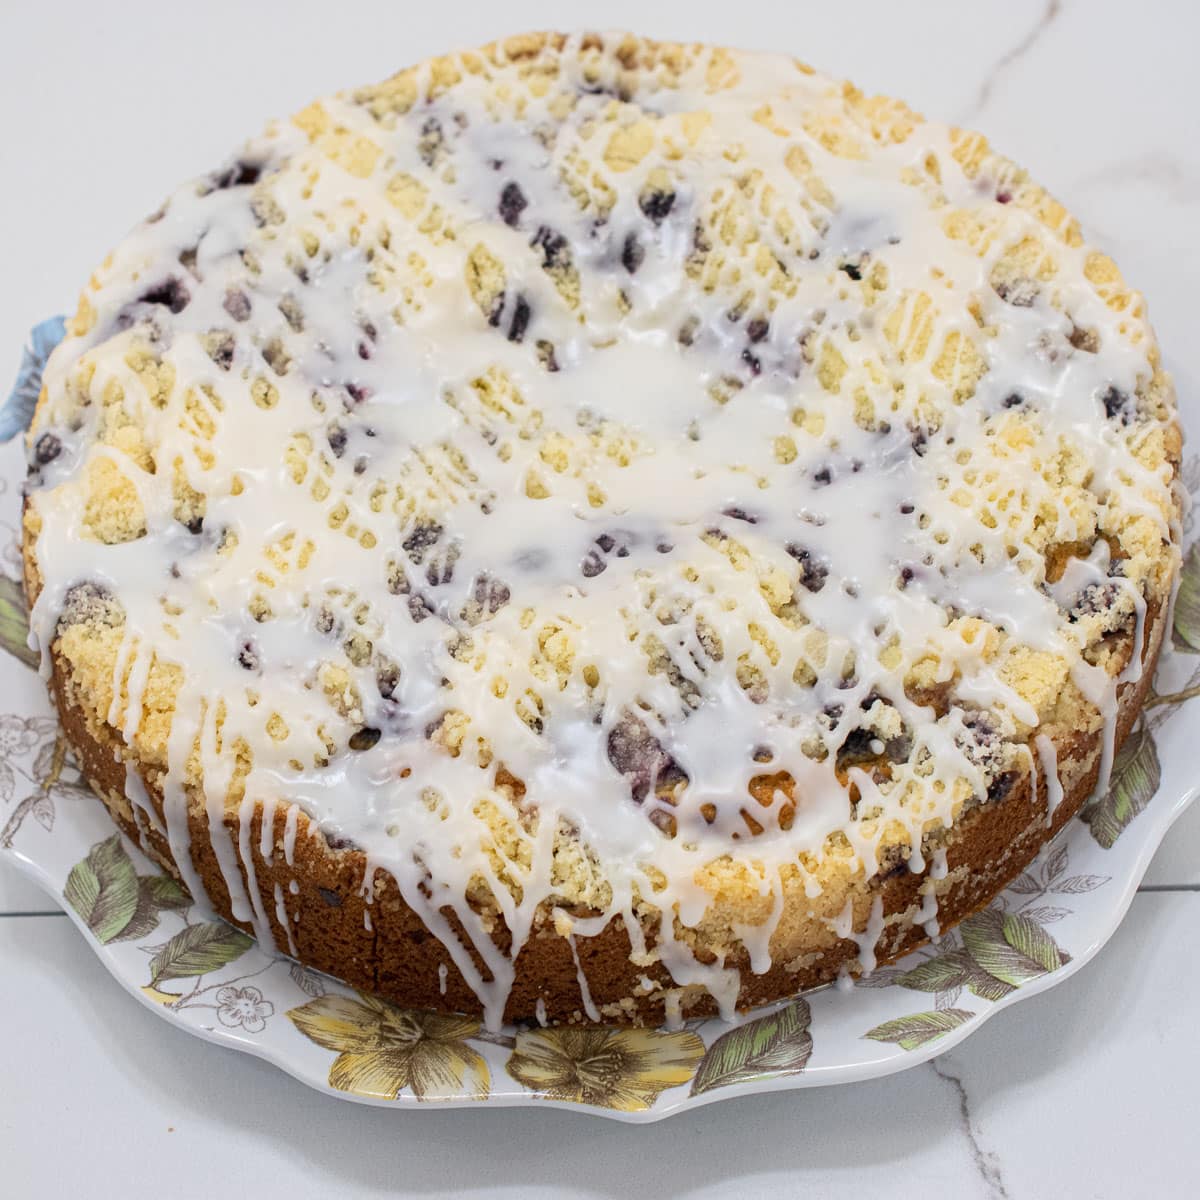 The Blueberry Crumb Coffeecake on a serving plate.